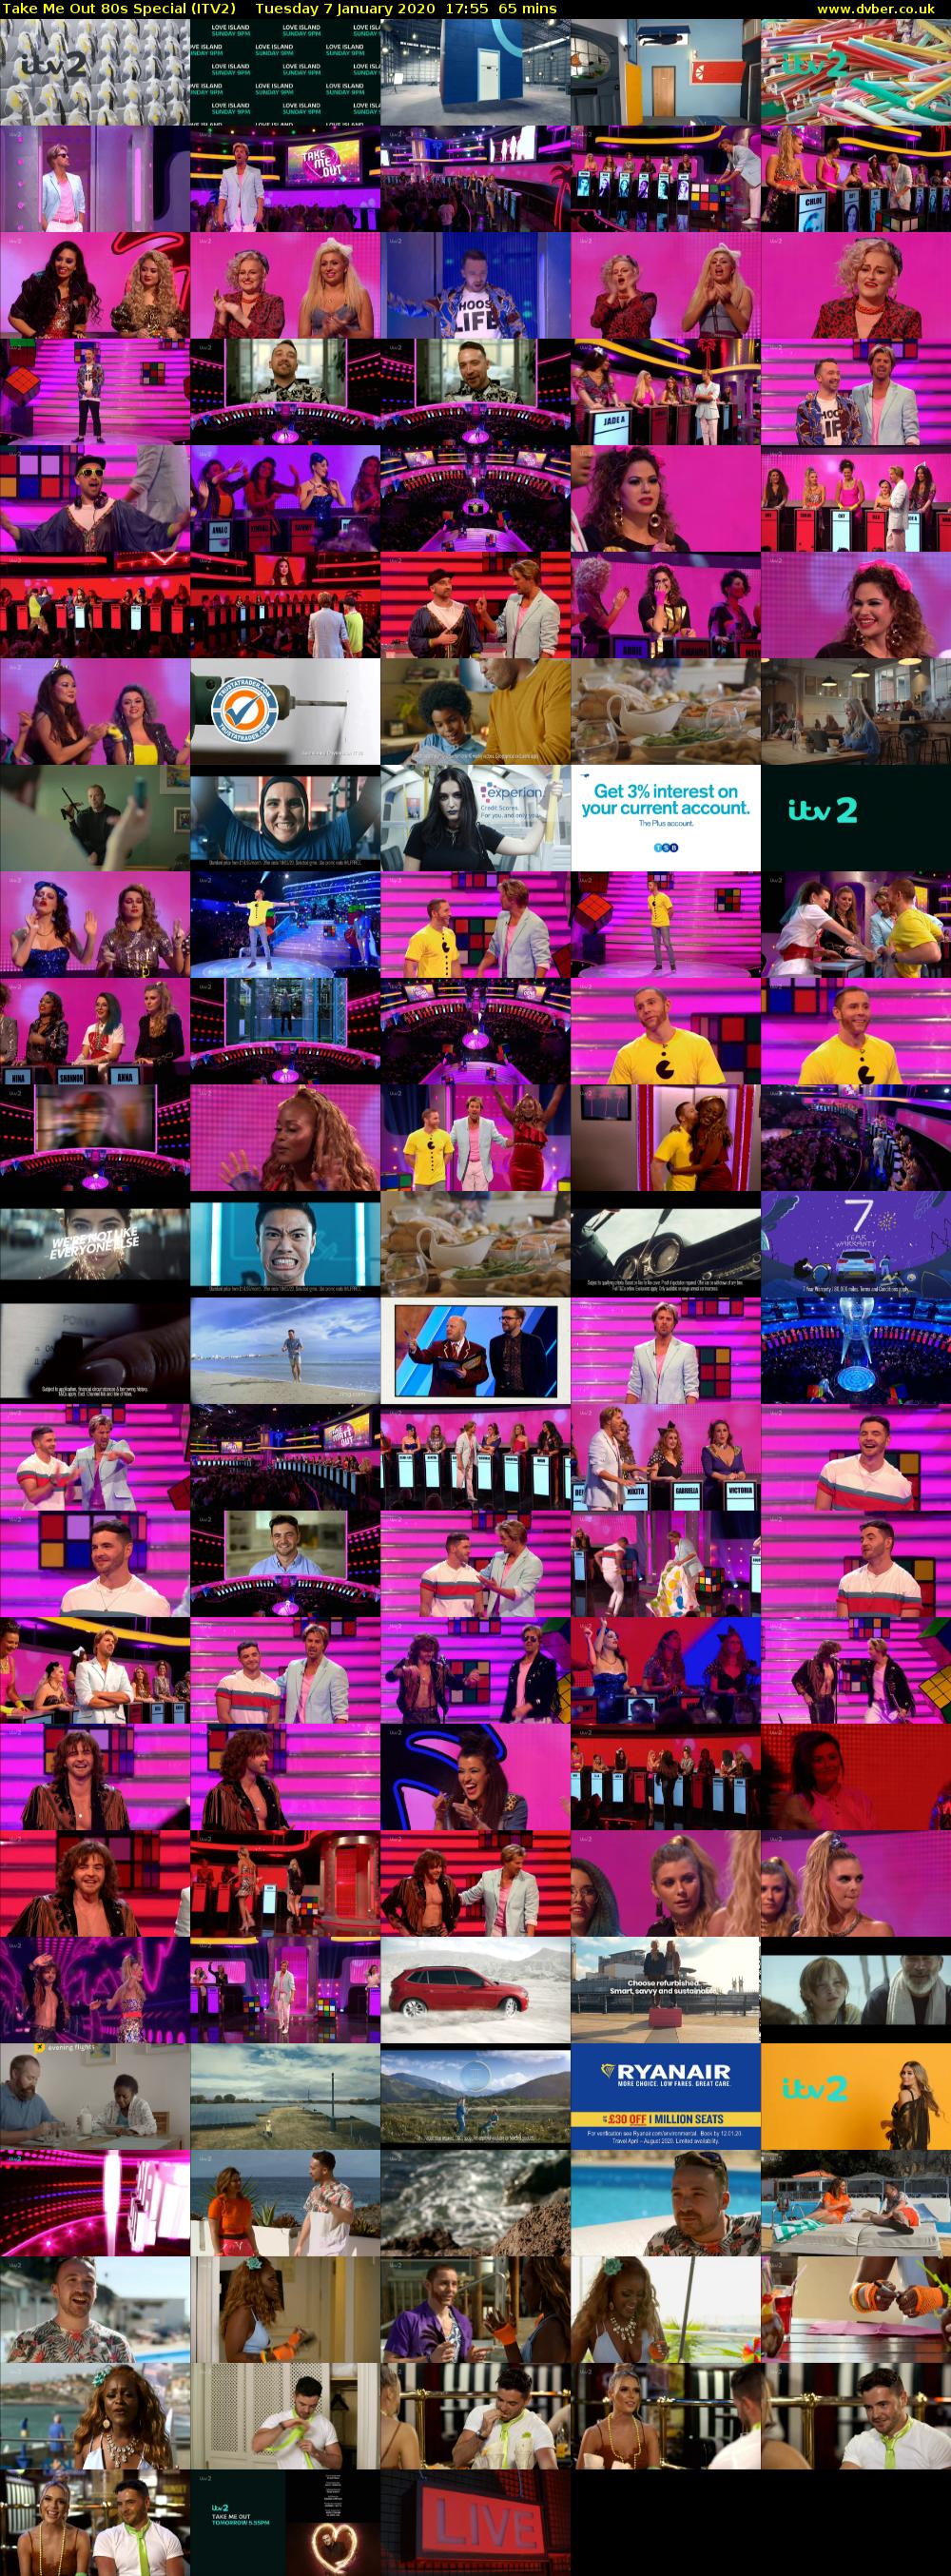 Take Me Out 80s Special (ITV2) Tuesday 7 January 2020 17:55 - 19:00